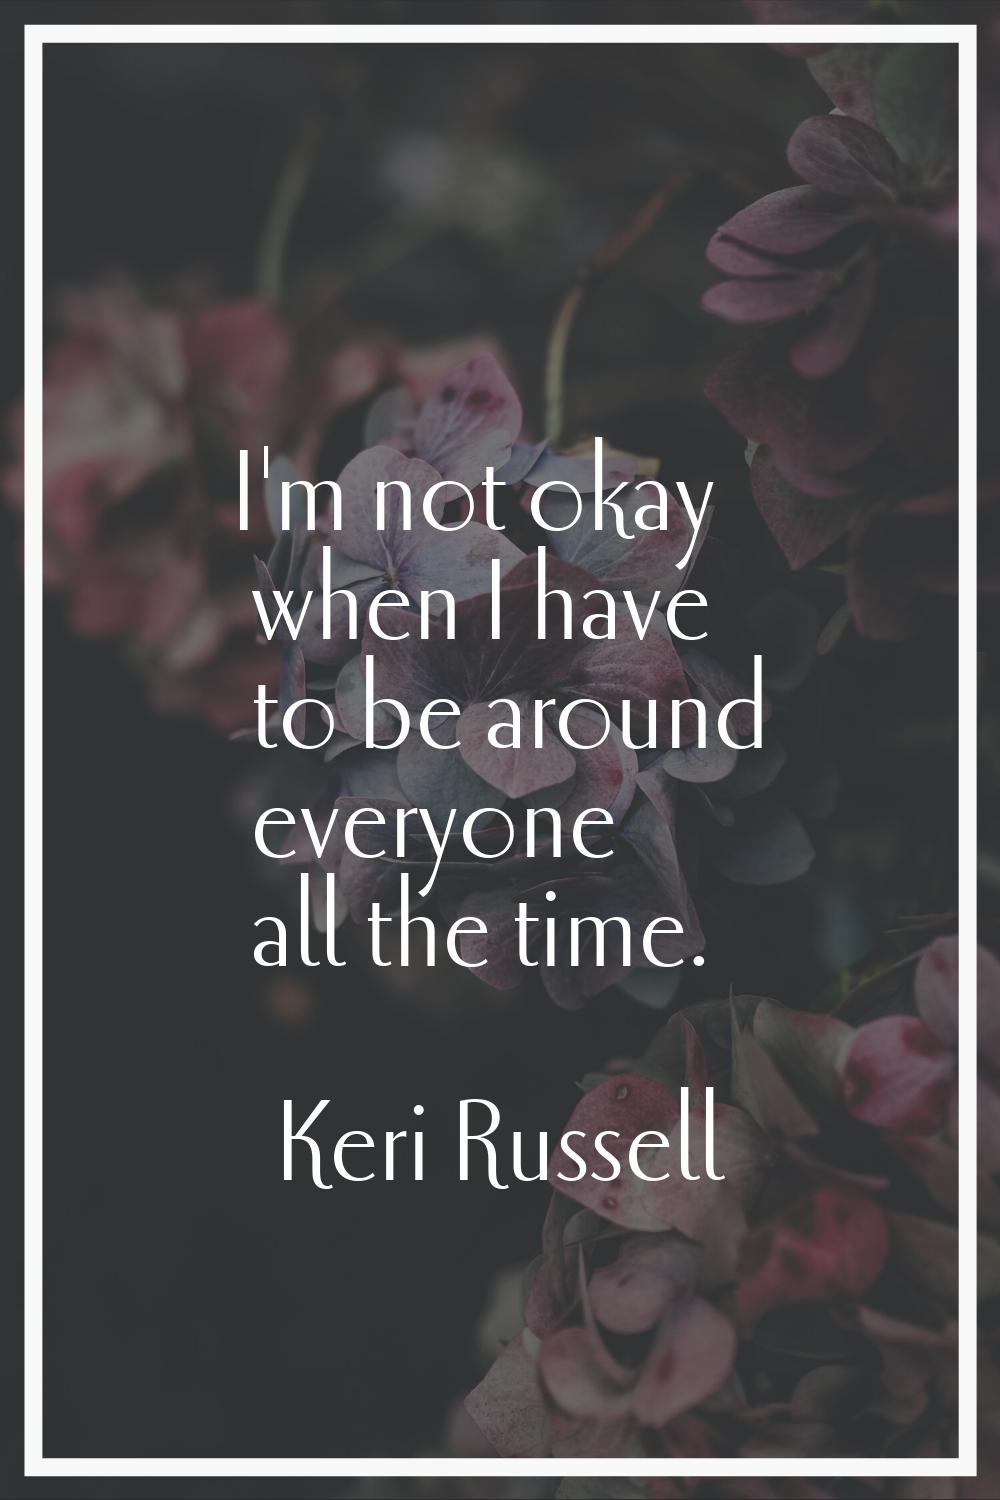 I'm not okay when I have to be around everyone all the time.